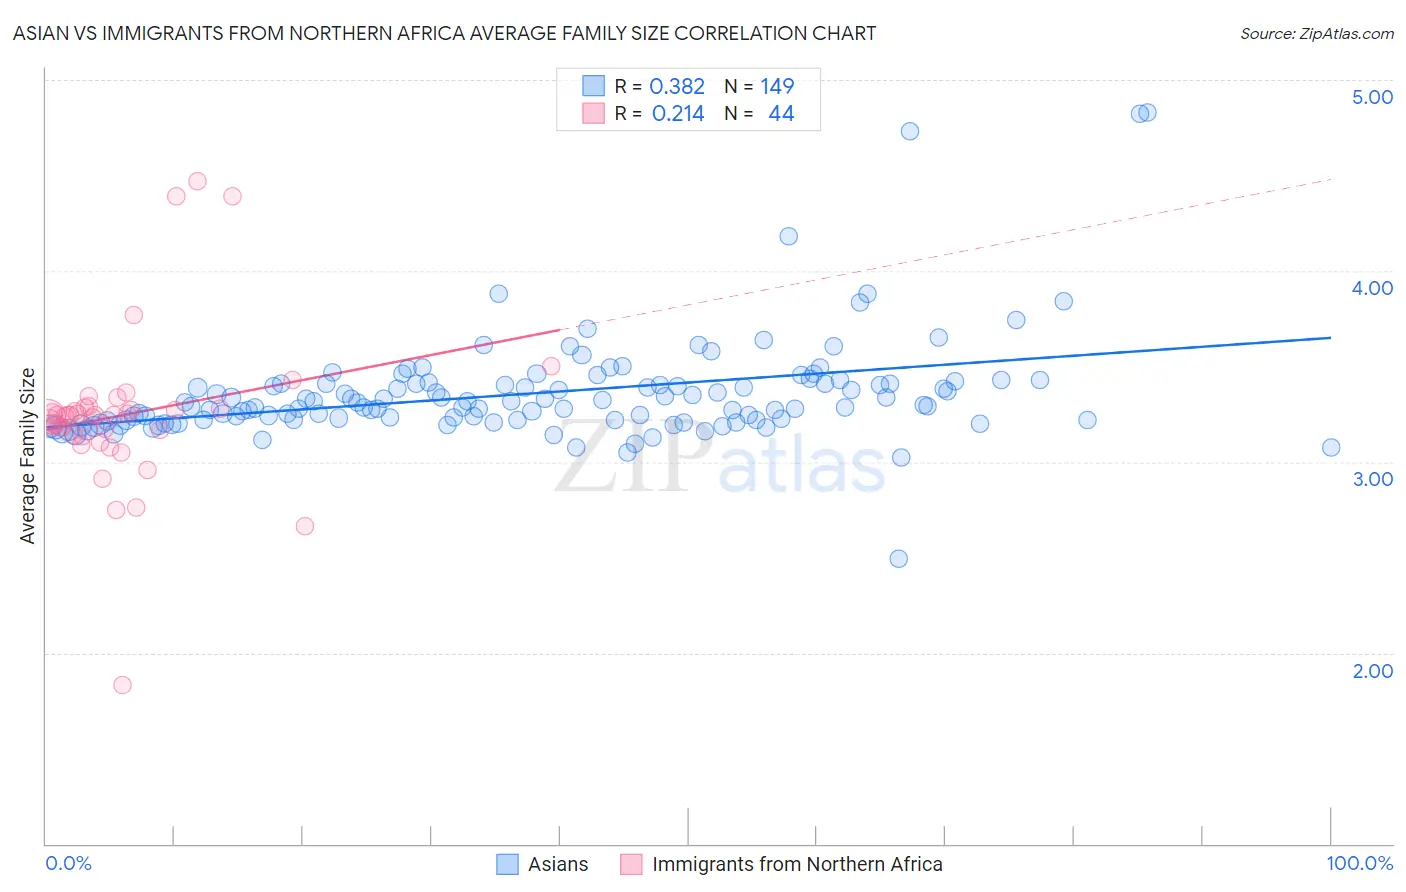 Asian vs Immigrants from Northern Africa Average Family Size